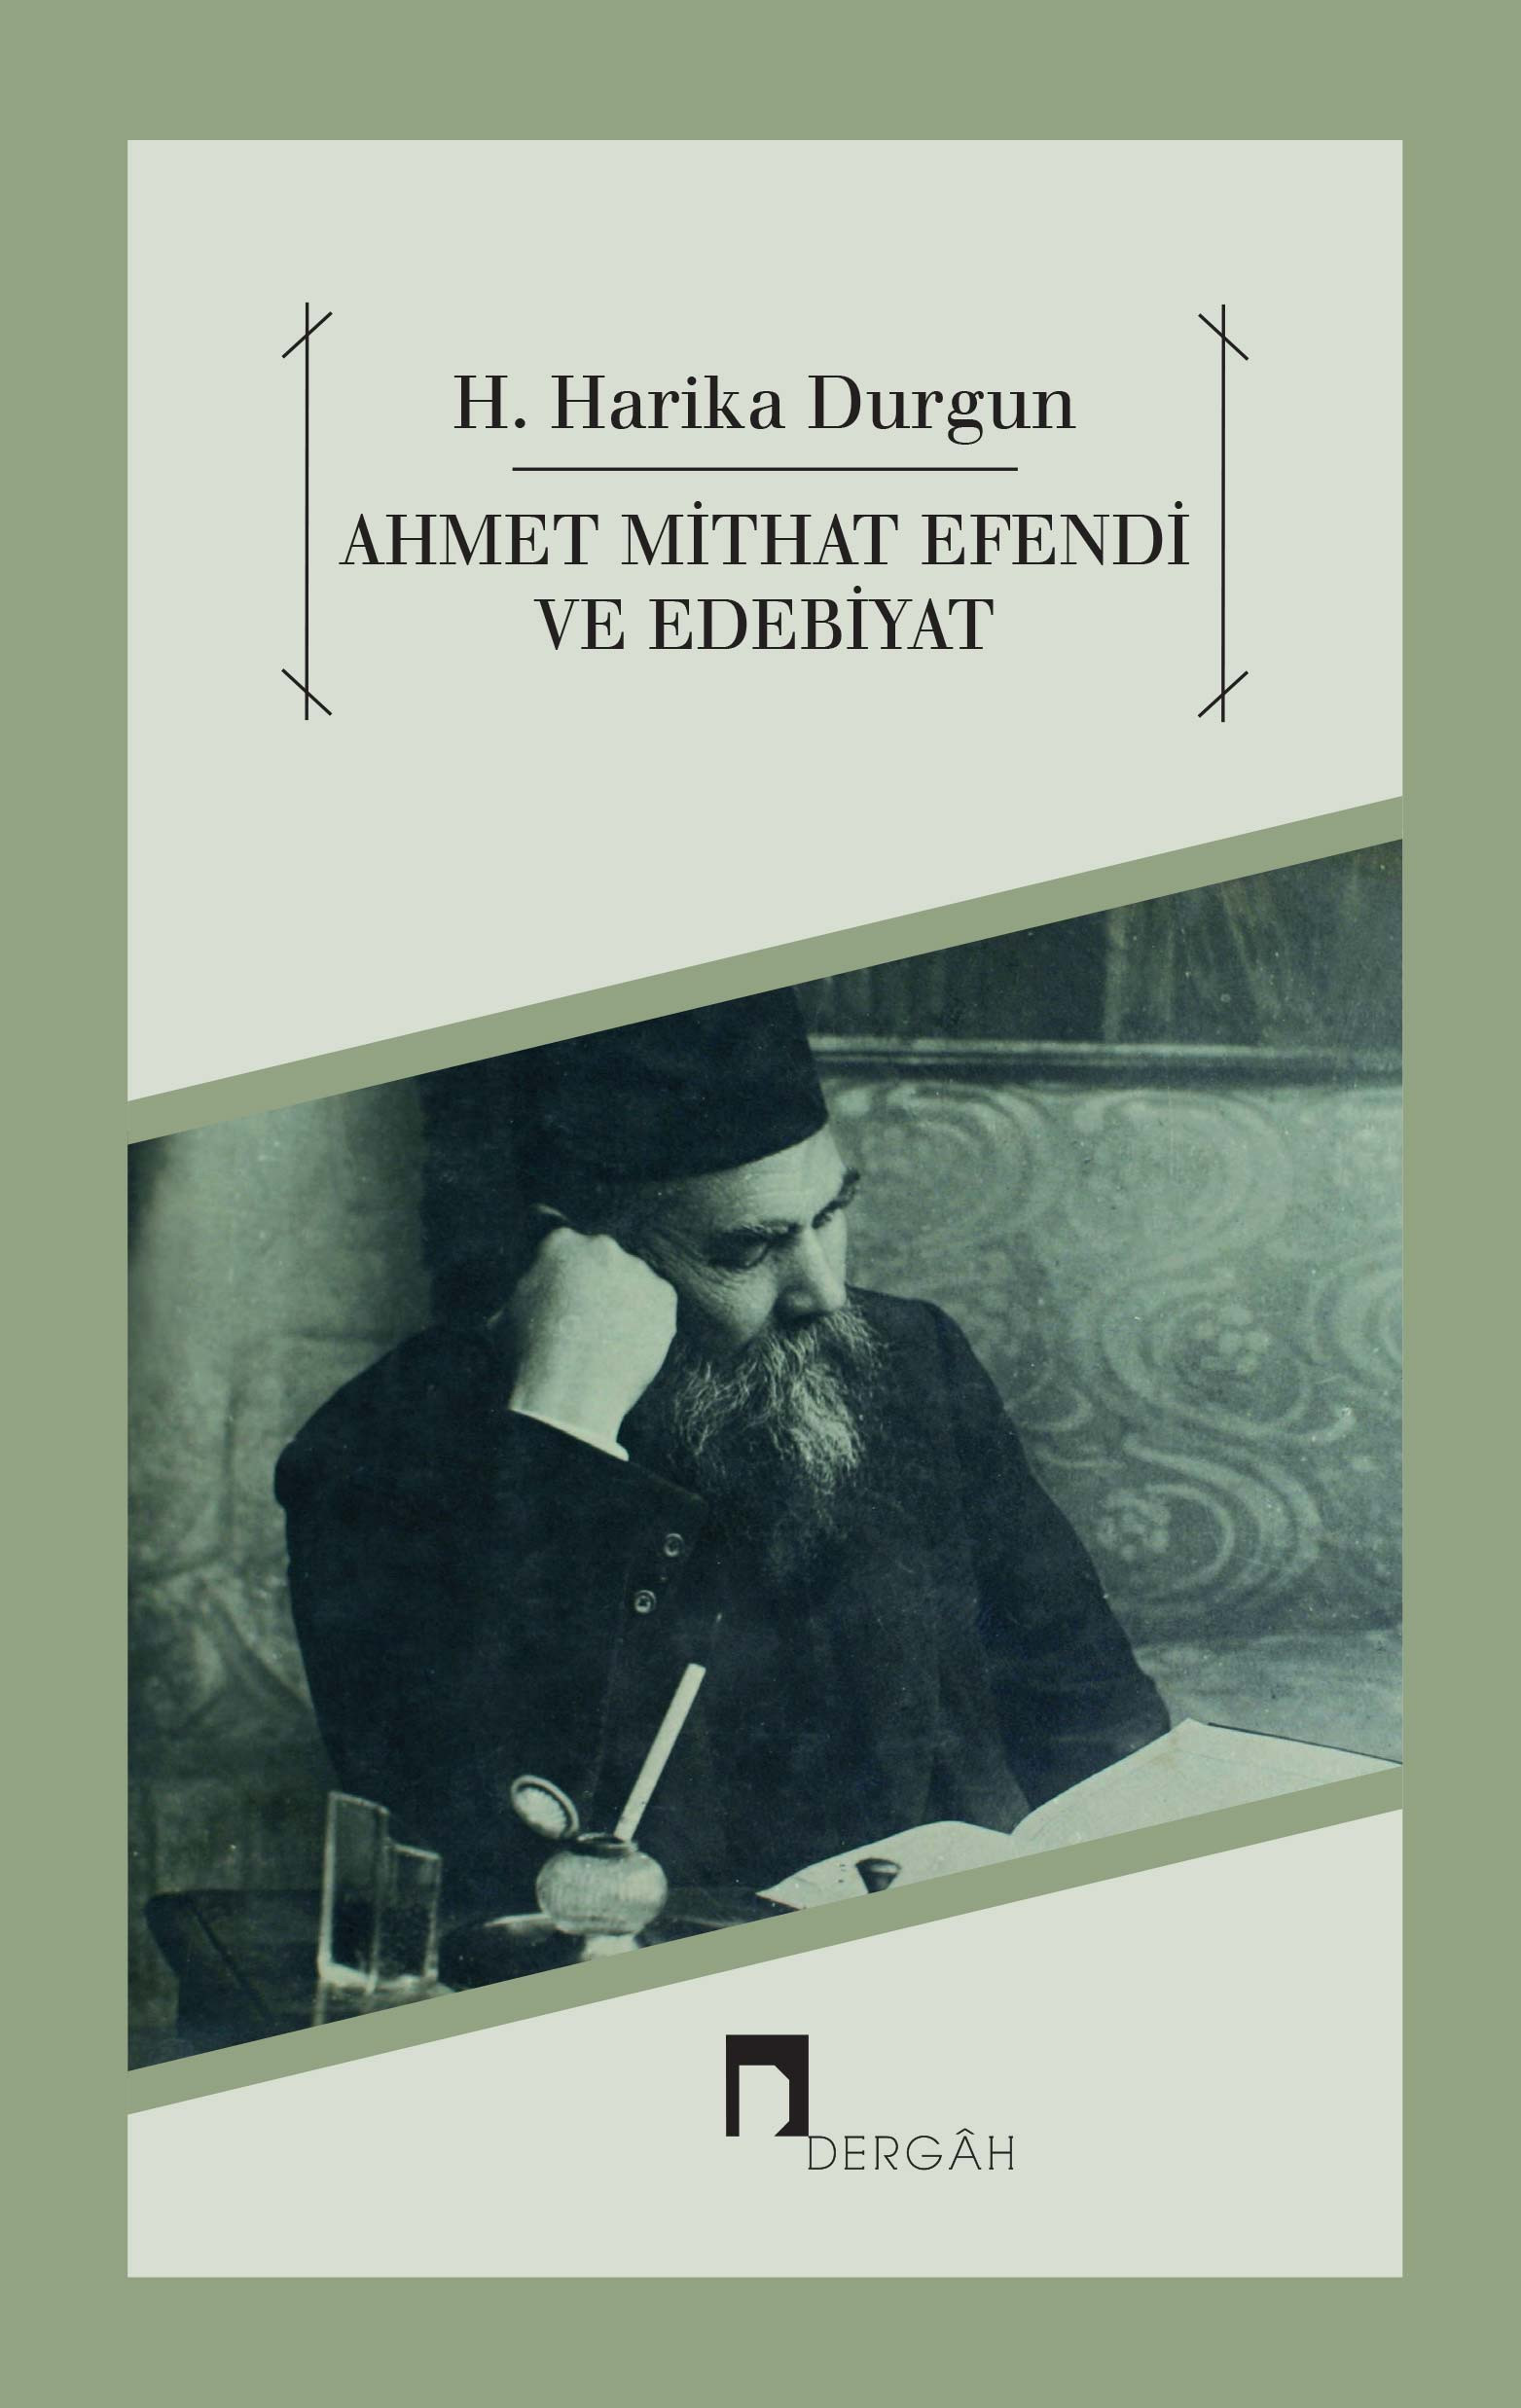 Literature and Ahmet Mithat